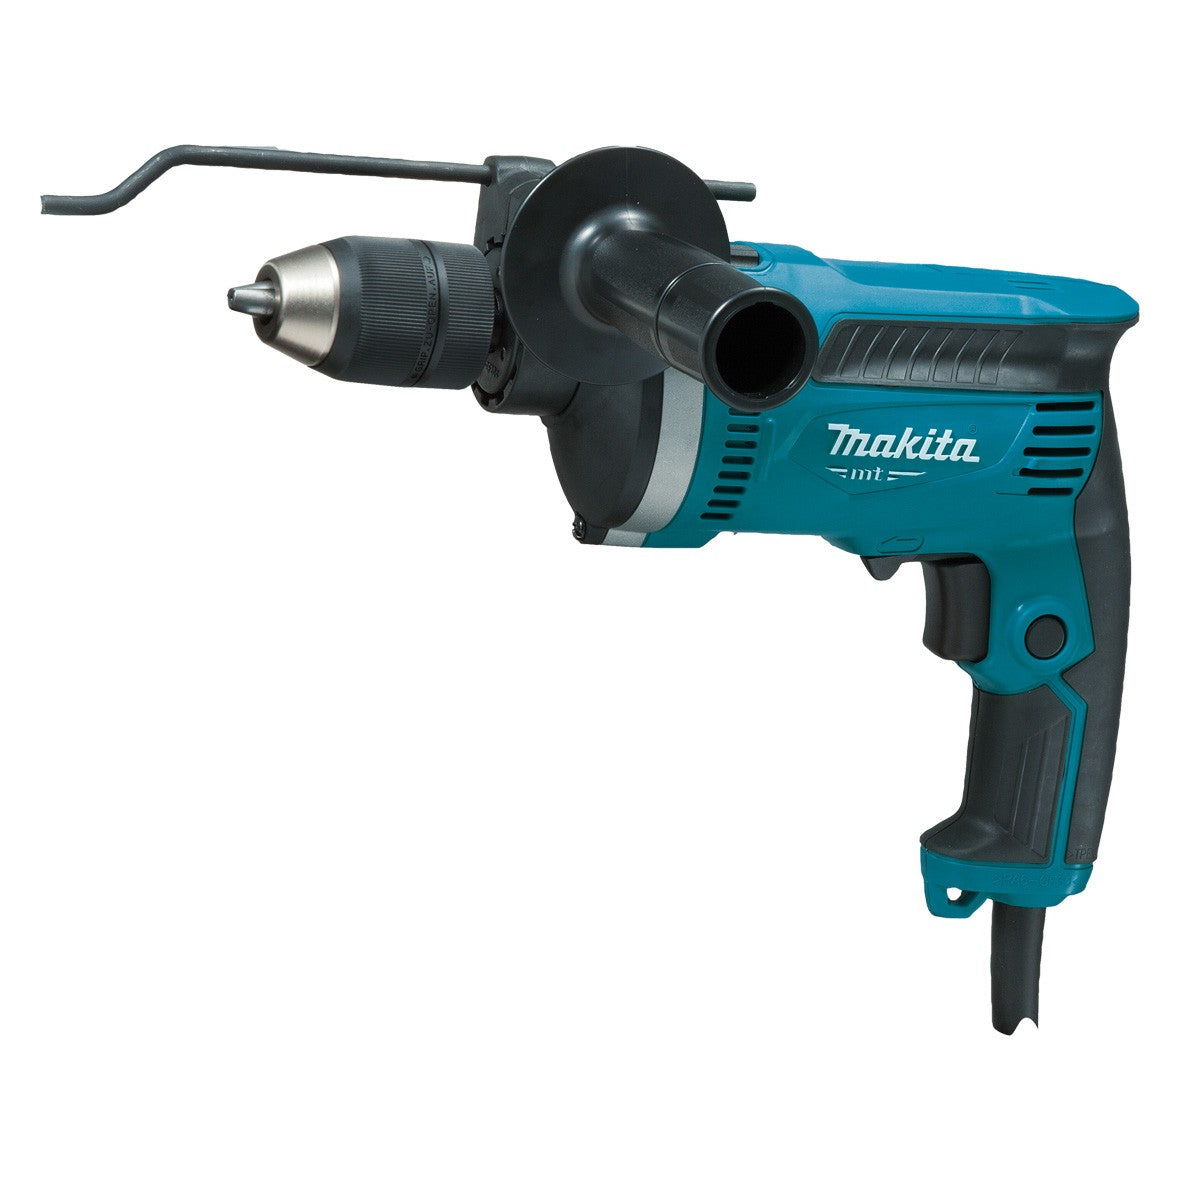 MT Series 16mm (5/8") Hammer Drill with Carry Case M8101KG by Makita